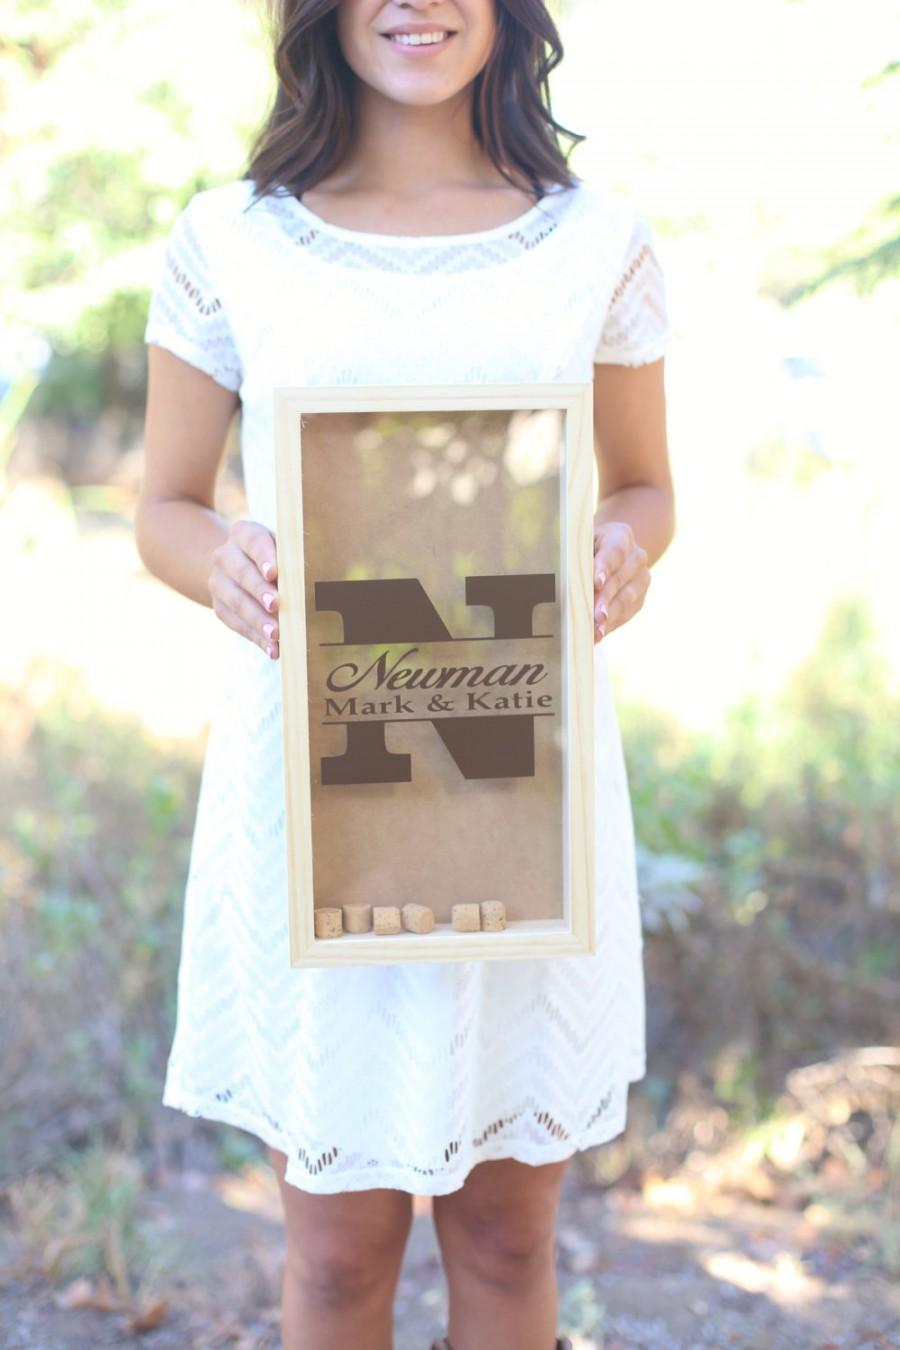 Wedding - Personalized Wine Cork Keeper Custom Wedding Gift Rustic Barn Wedding Bridal Shower Present QUICK shipping available